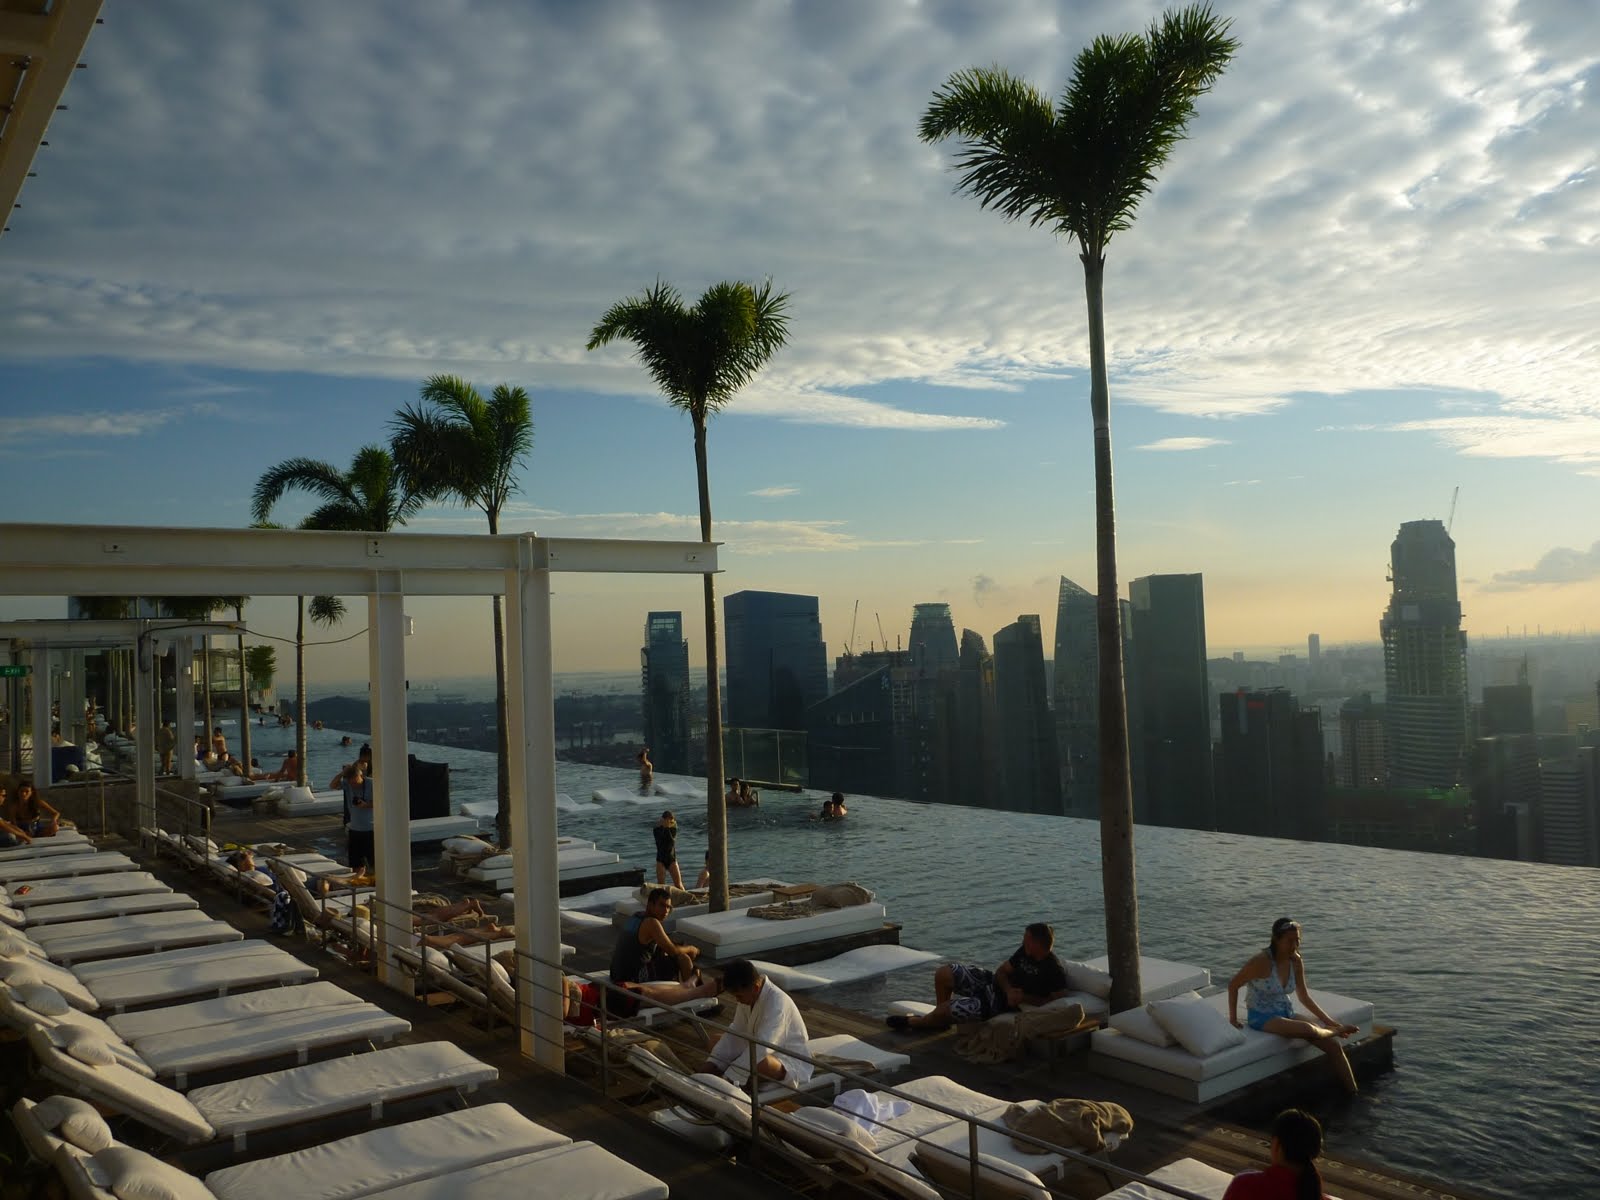 %5Bresize%5D+3293+%5Bsingapore+-+marina+bay+sands+building%5D+sunset+at+the+rooftop+pool+I.JPG